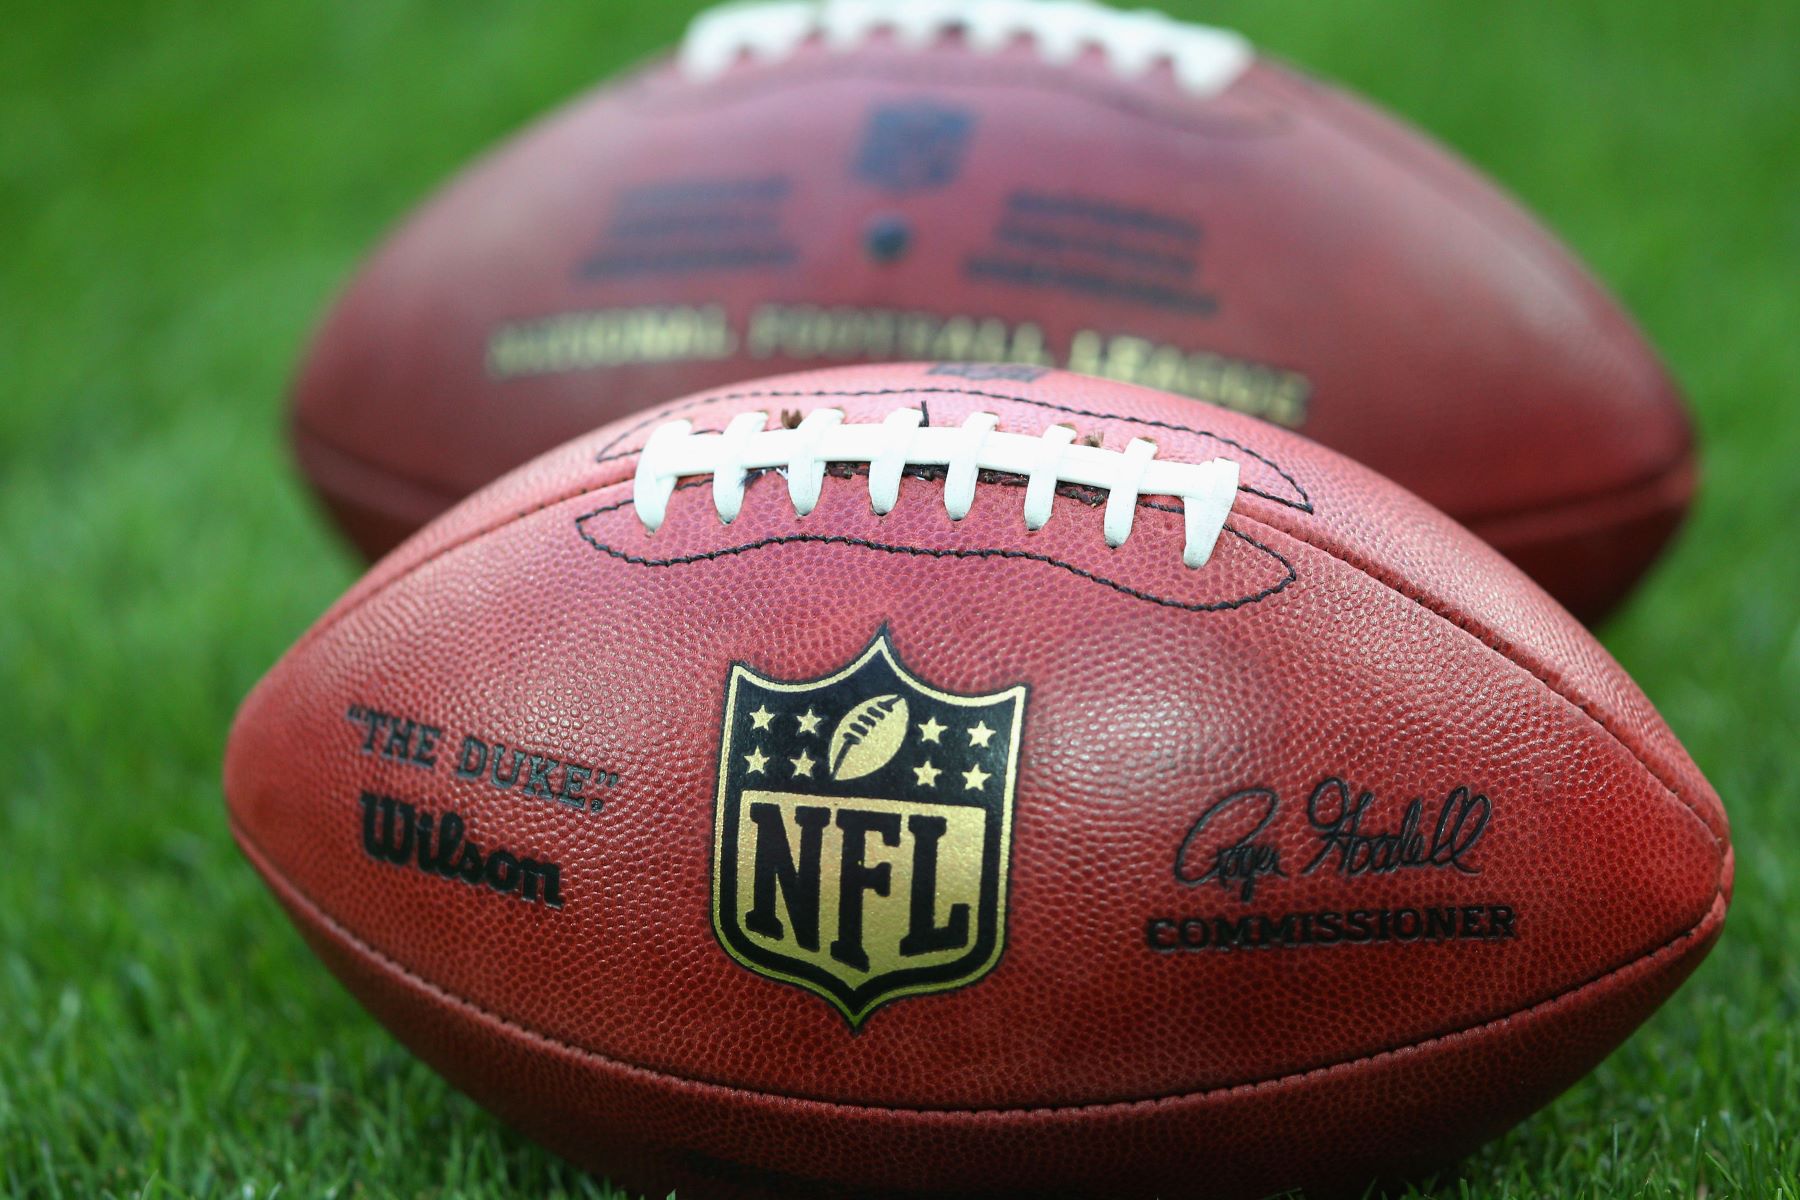 The Shocking Price Tag Of An Authentic NFL Football Revealed!